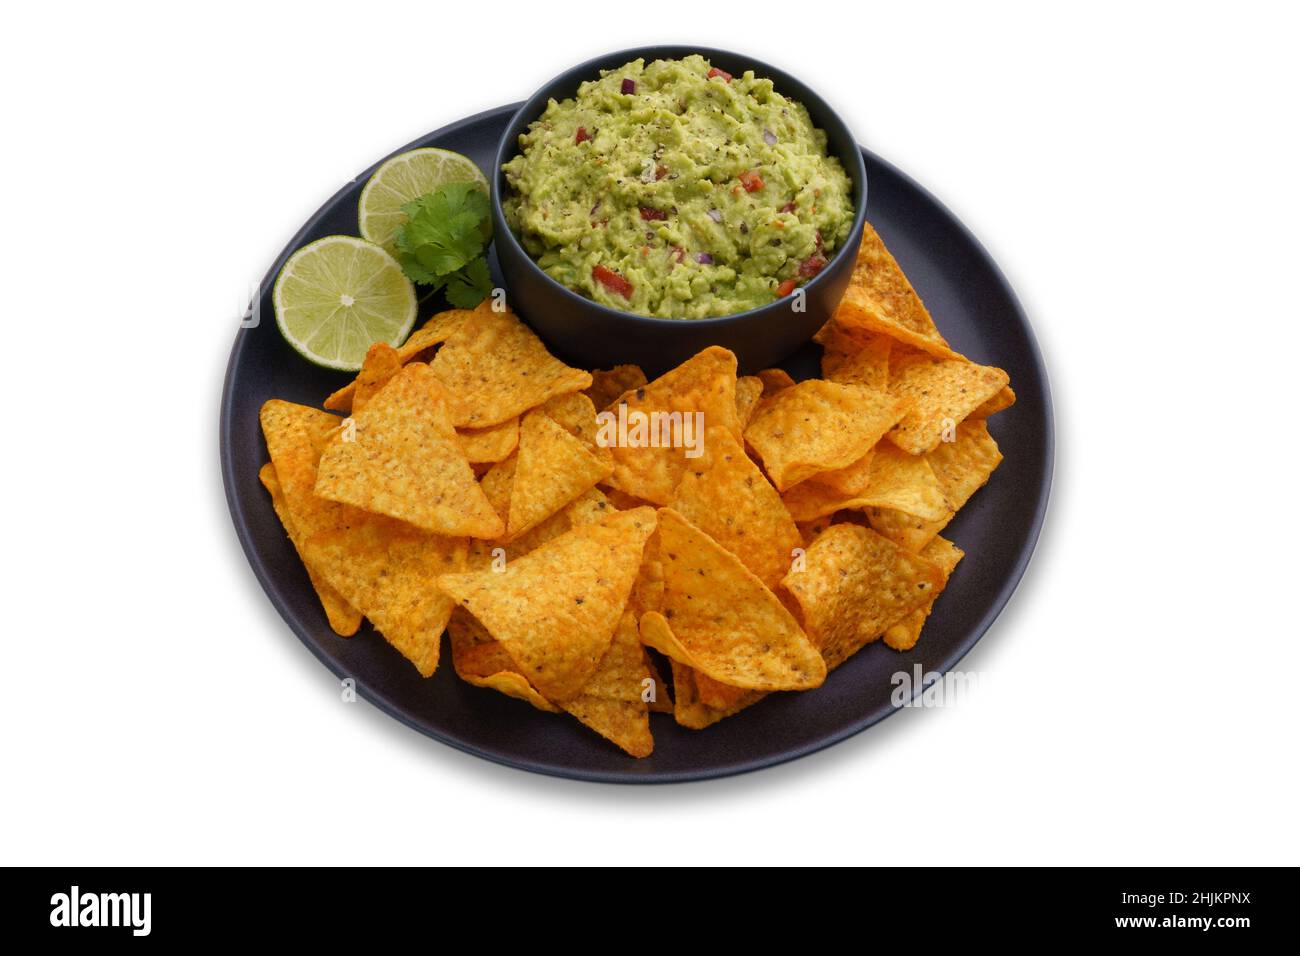 Black plate of guacamole dip and tortilla chips or nachos isolated on a white background Stock Photo